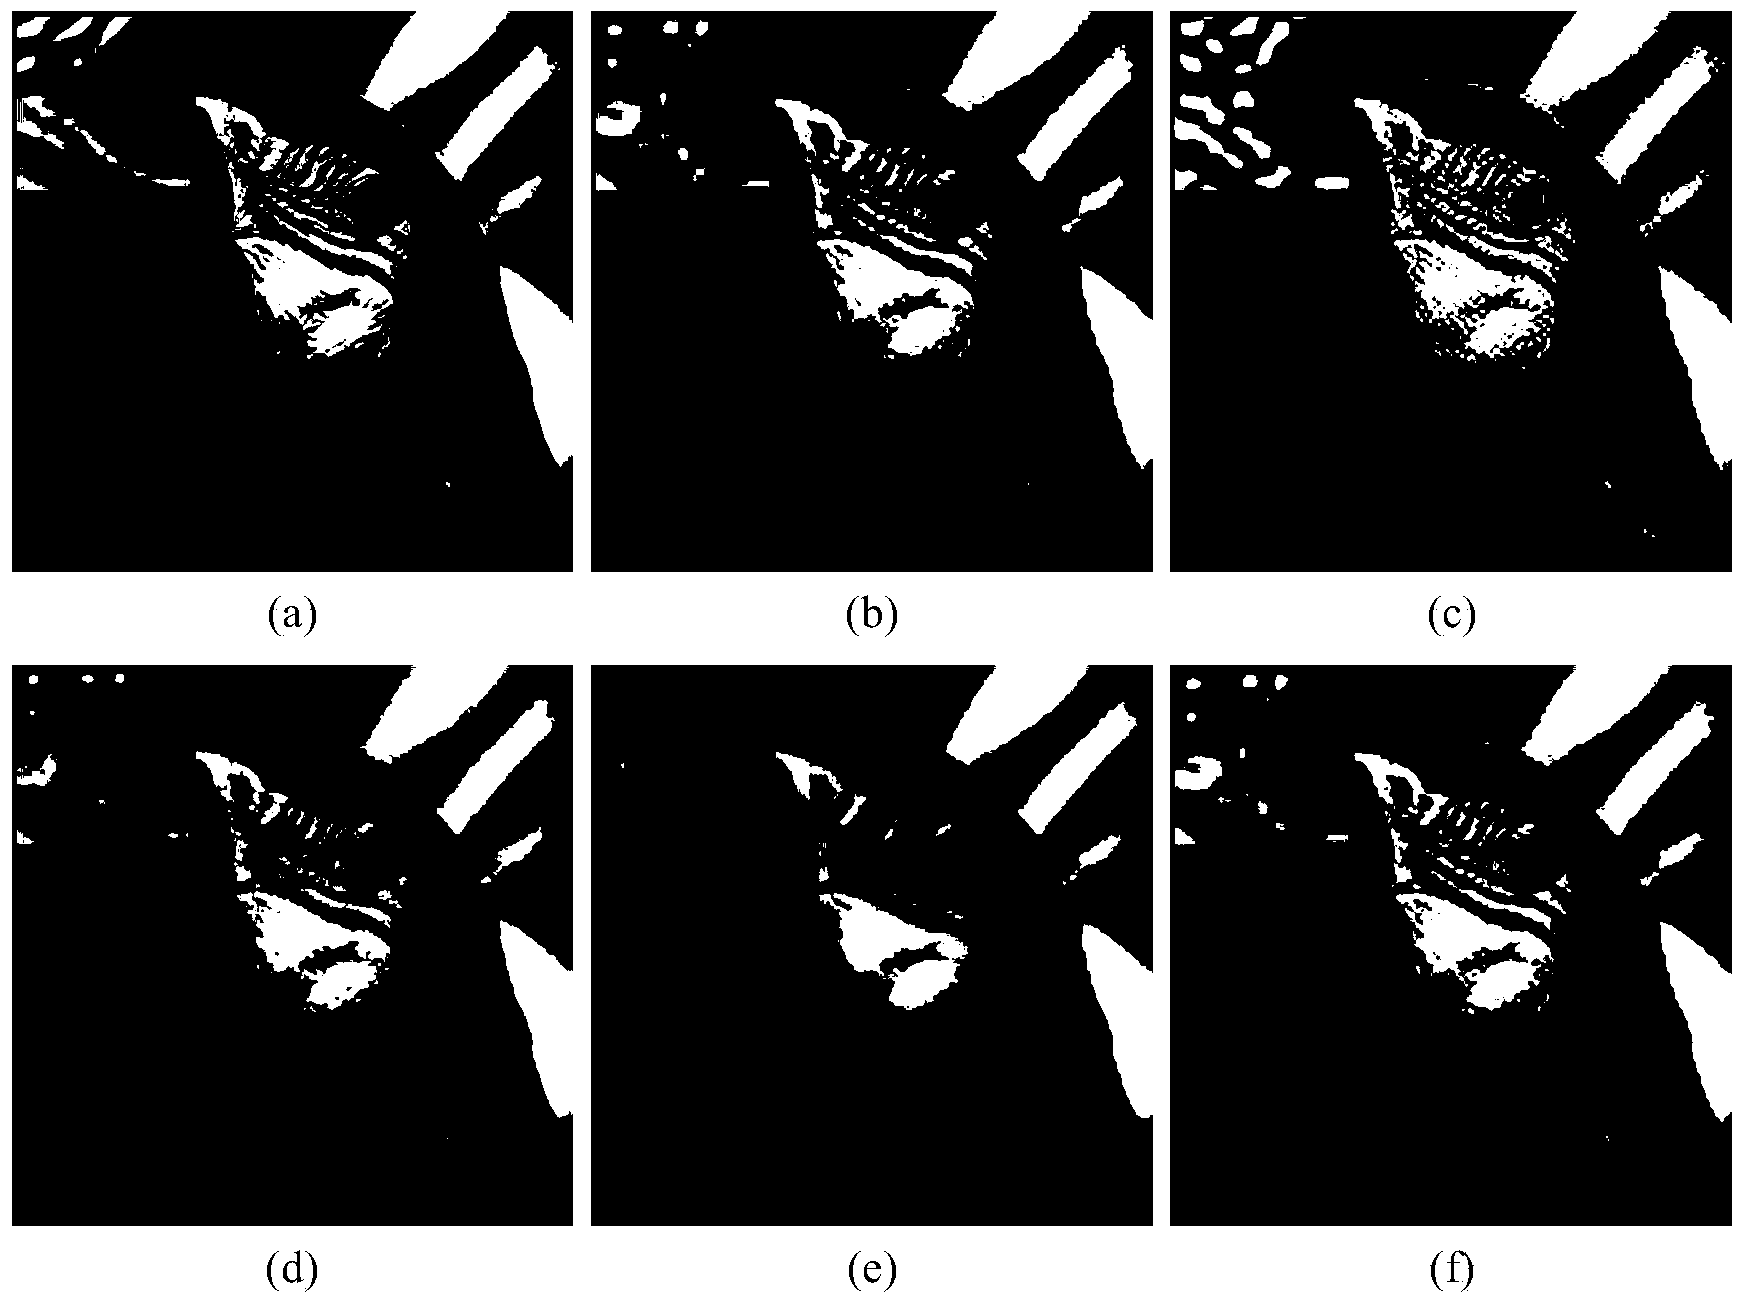 Image super-resolution reconstruction method based on multi-layer supporting vectors